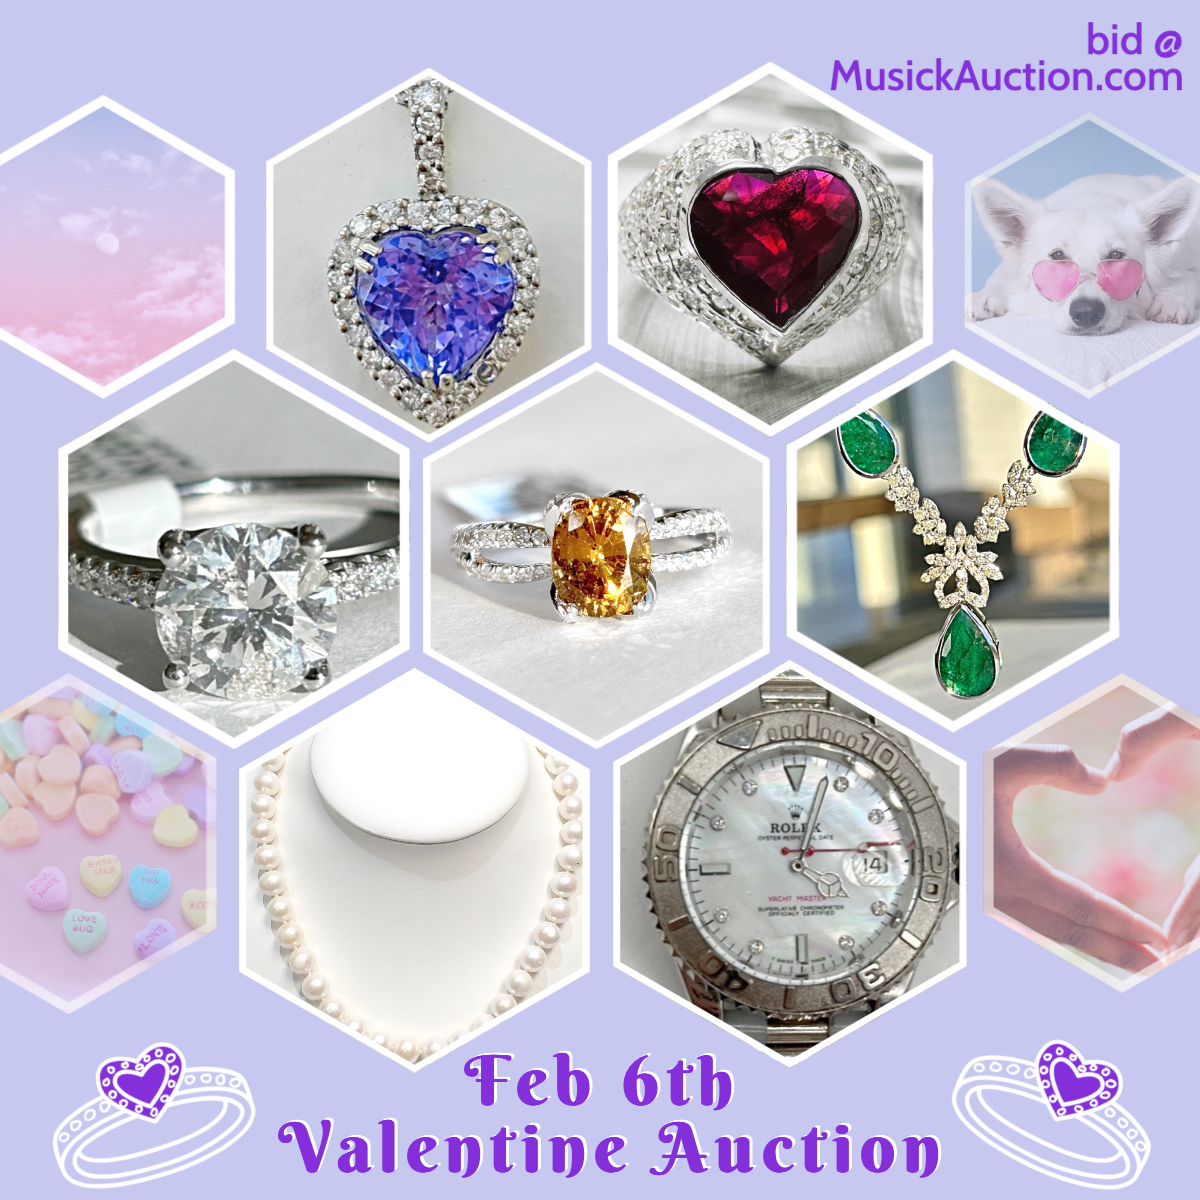 💖 More items added to the Feb. 6th, 6pm Auction! 💝
#valentine #giftideas #valentinegifts #valentinejewelry #justintimeforvalentines #jewelrystore #onlineshopping 
bid.musickauction.com/auctions/catal…